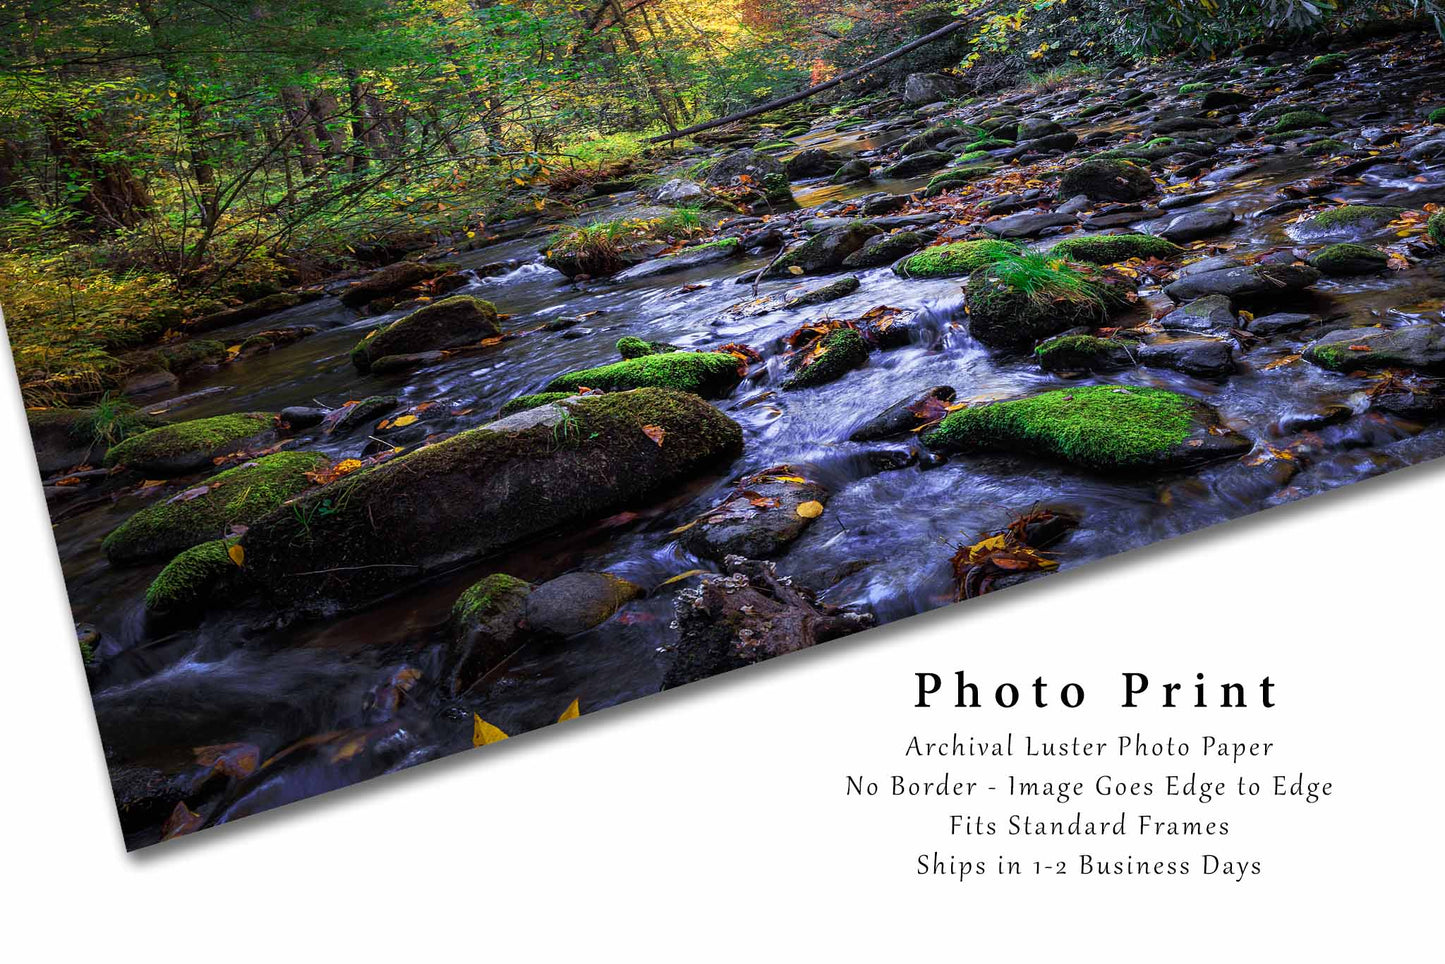 Forest Photography Print (Not Framed) Picture of Creek on Autumn Day in Great Smoky Mountains National Park Tennessee Landscape Wall Art Nature Decor